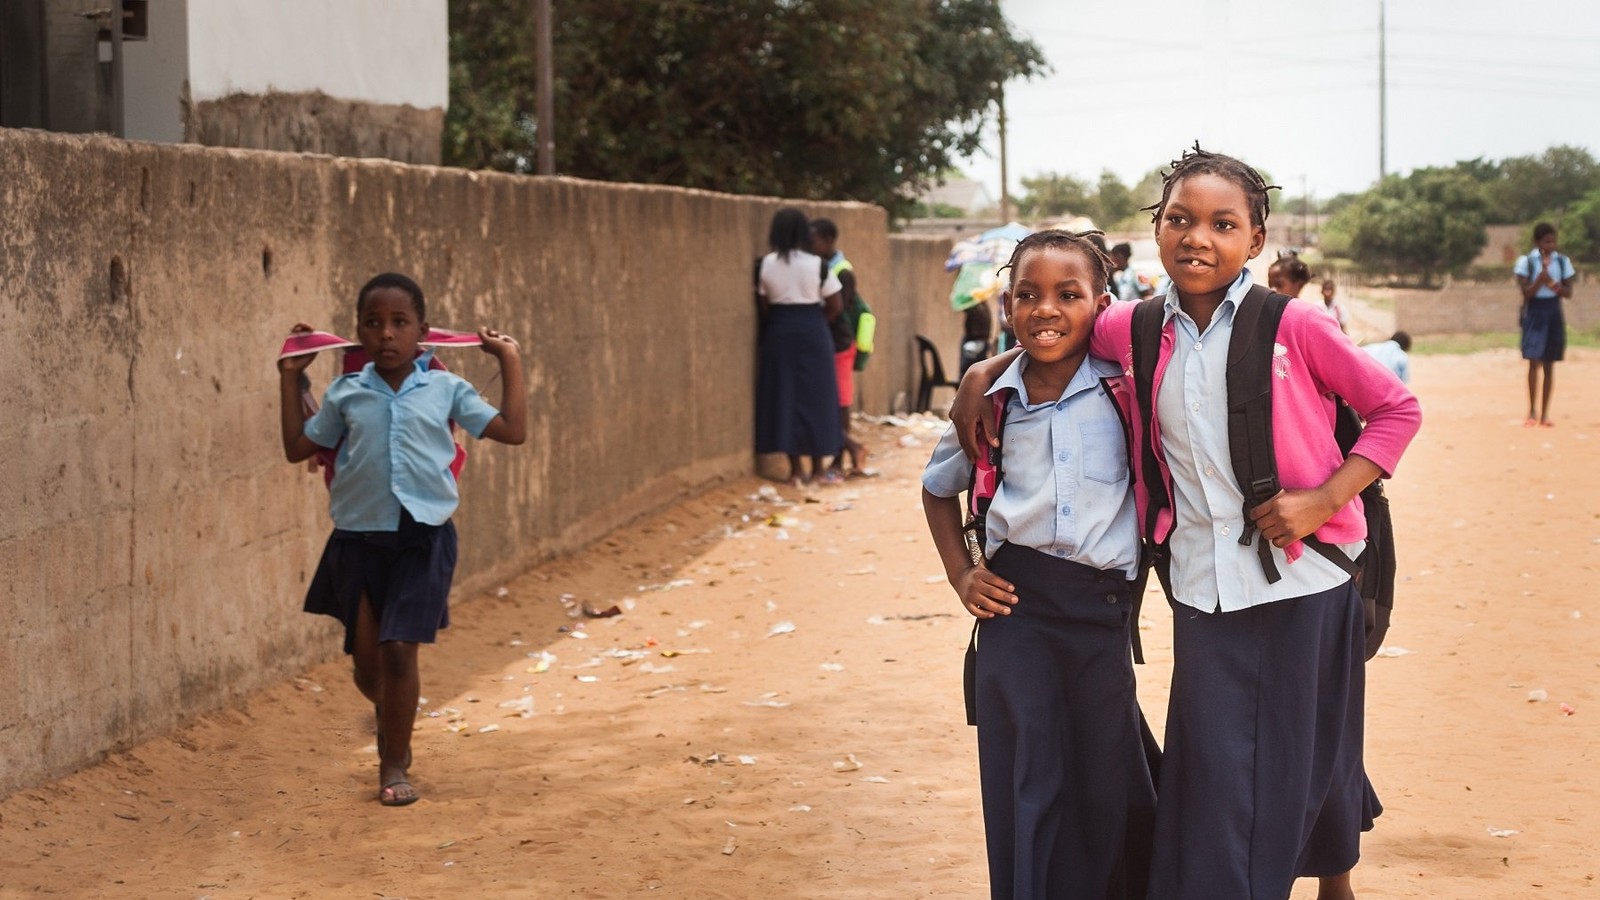 Girls walk to school together in Mozambique.